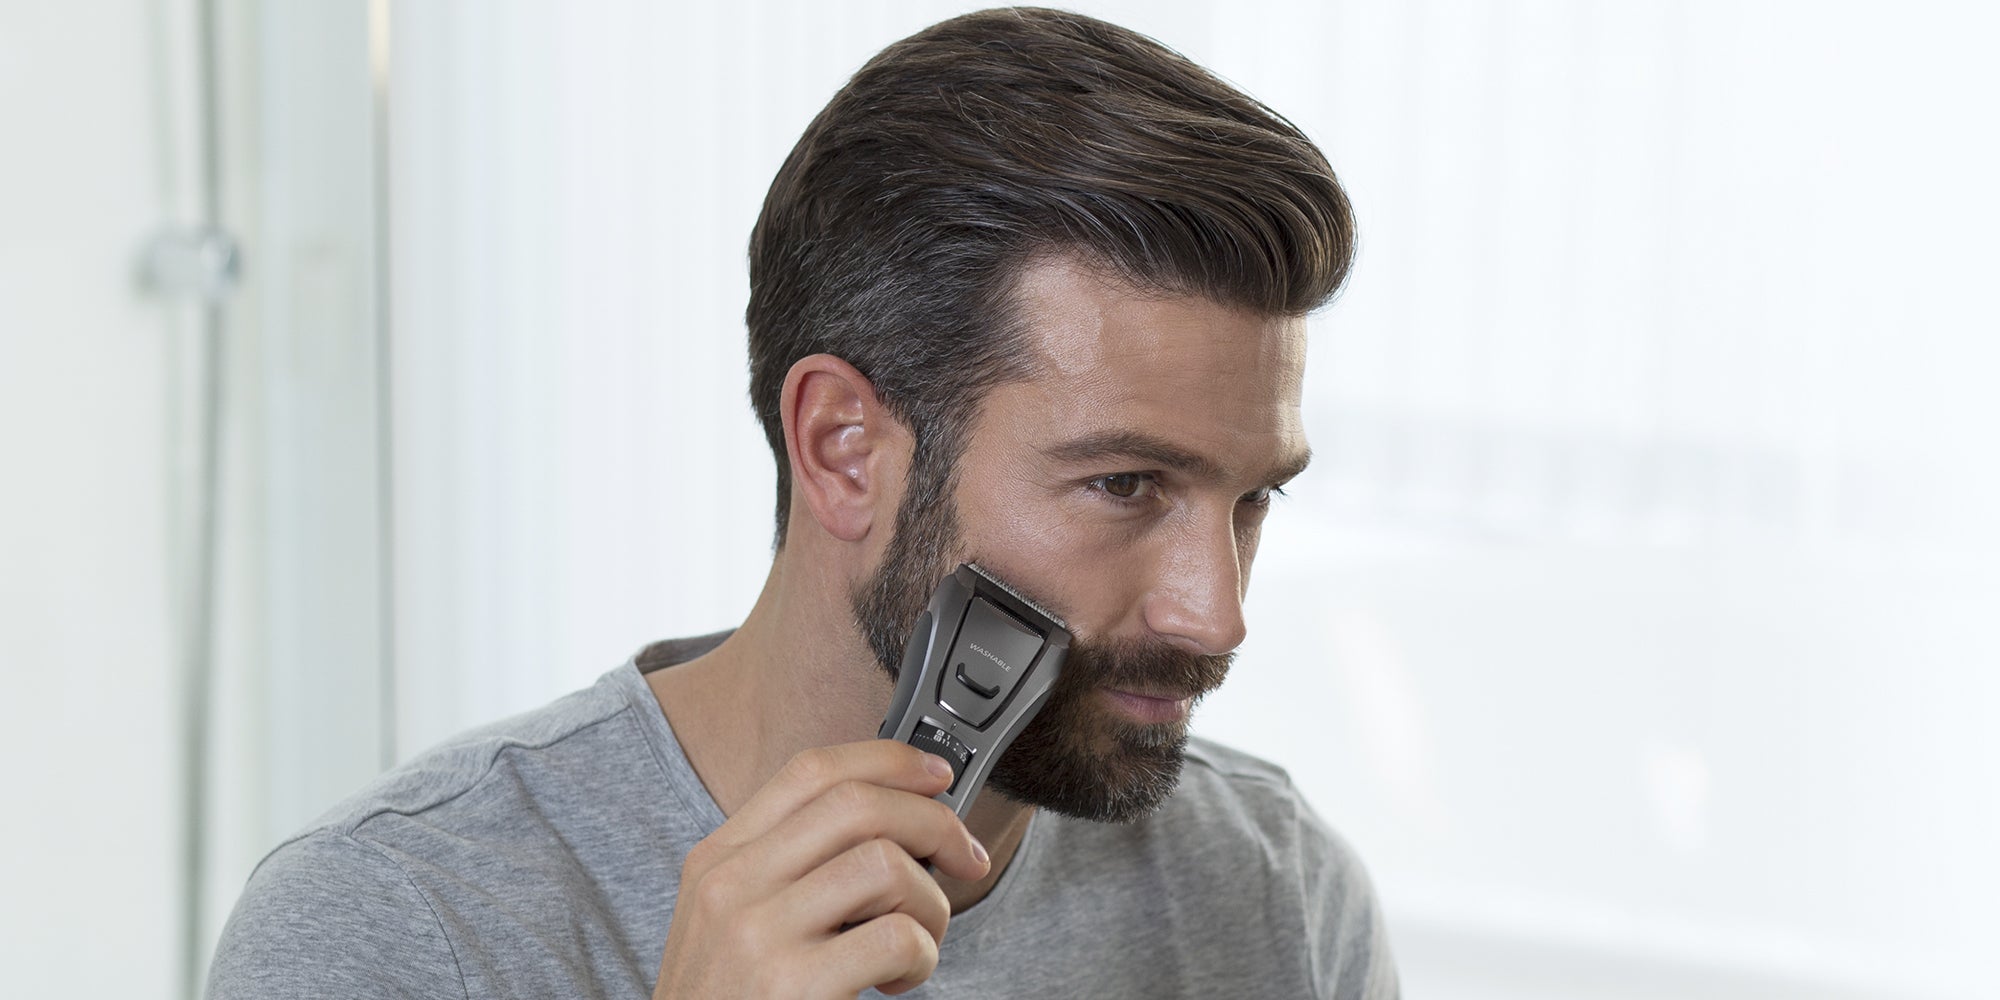 Panasonic Beard, Hair and Body Groomer with 2 Comb Attachments and 39  Adjustable Length Settings - ER-GB80-S